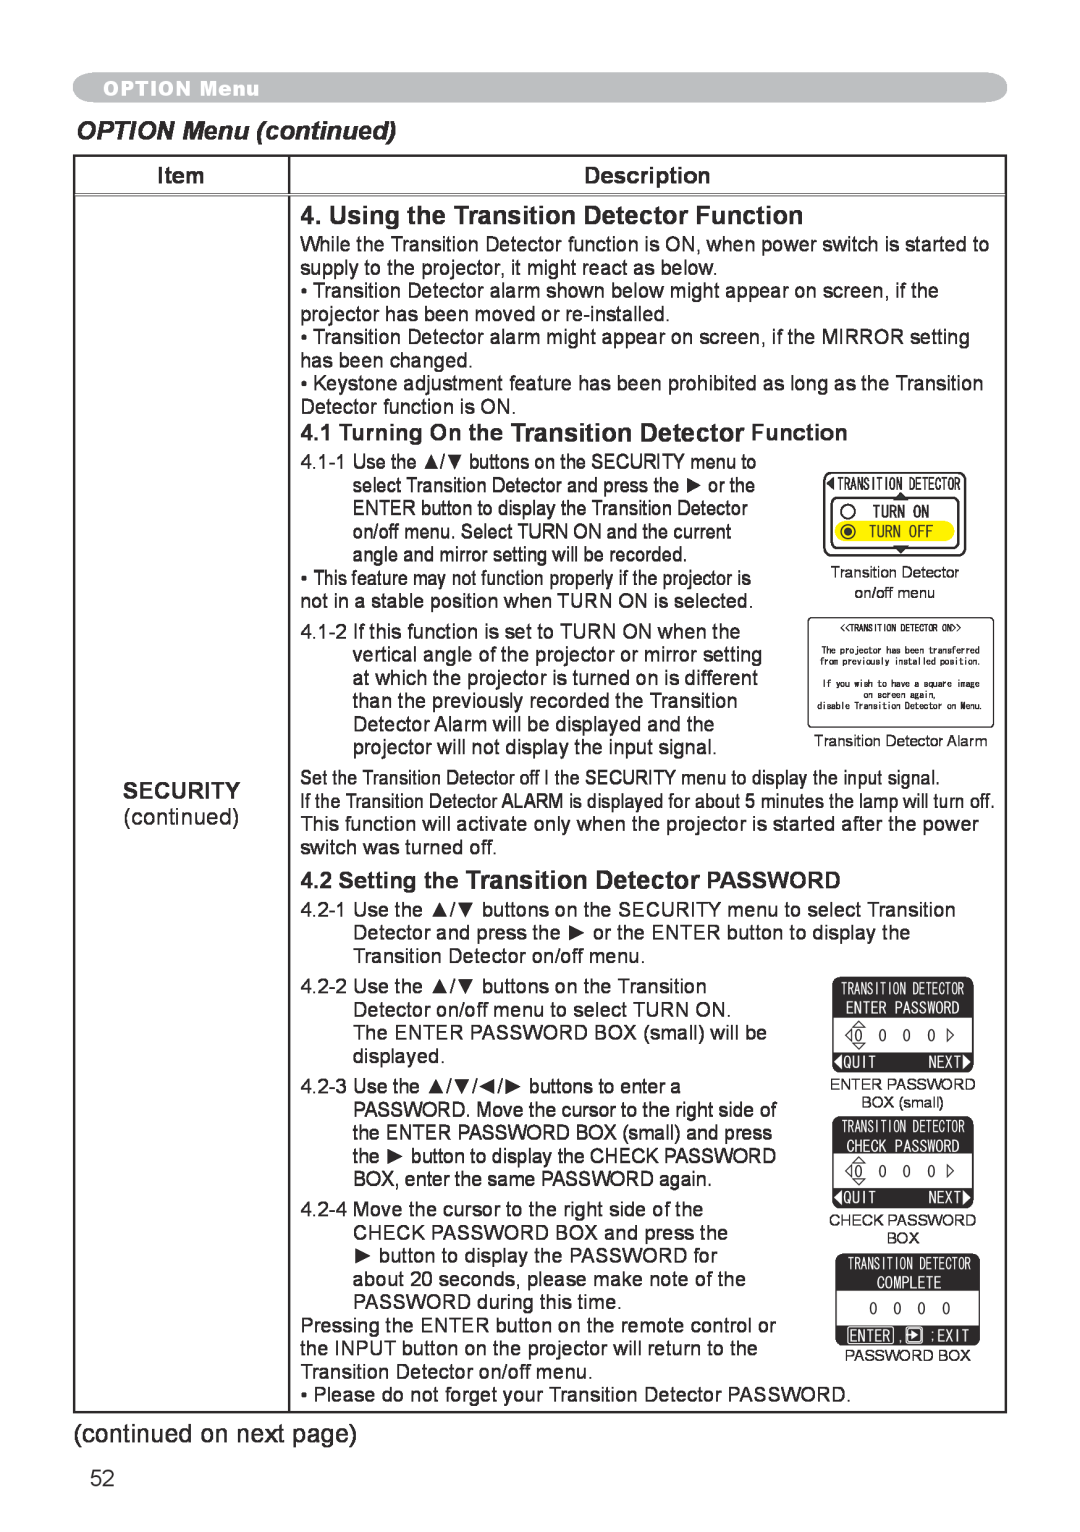 Hitachi CP-X608 user manual Using the Transition Detector Function, OPTION Menu continued, Description, SECURITY continued 